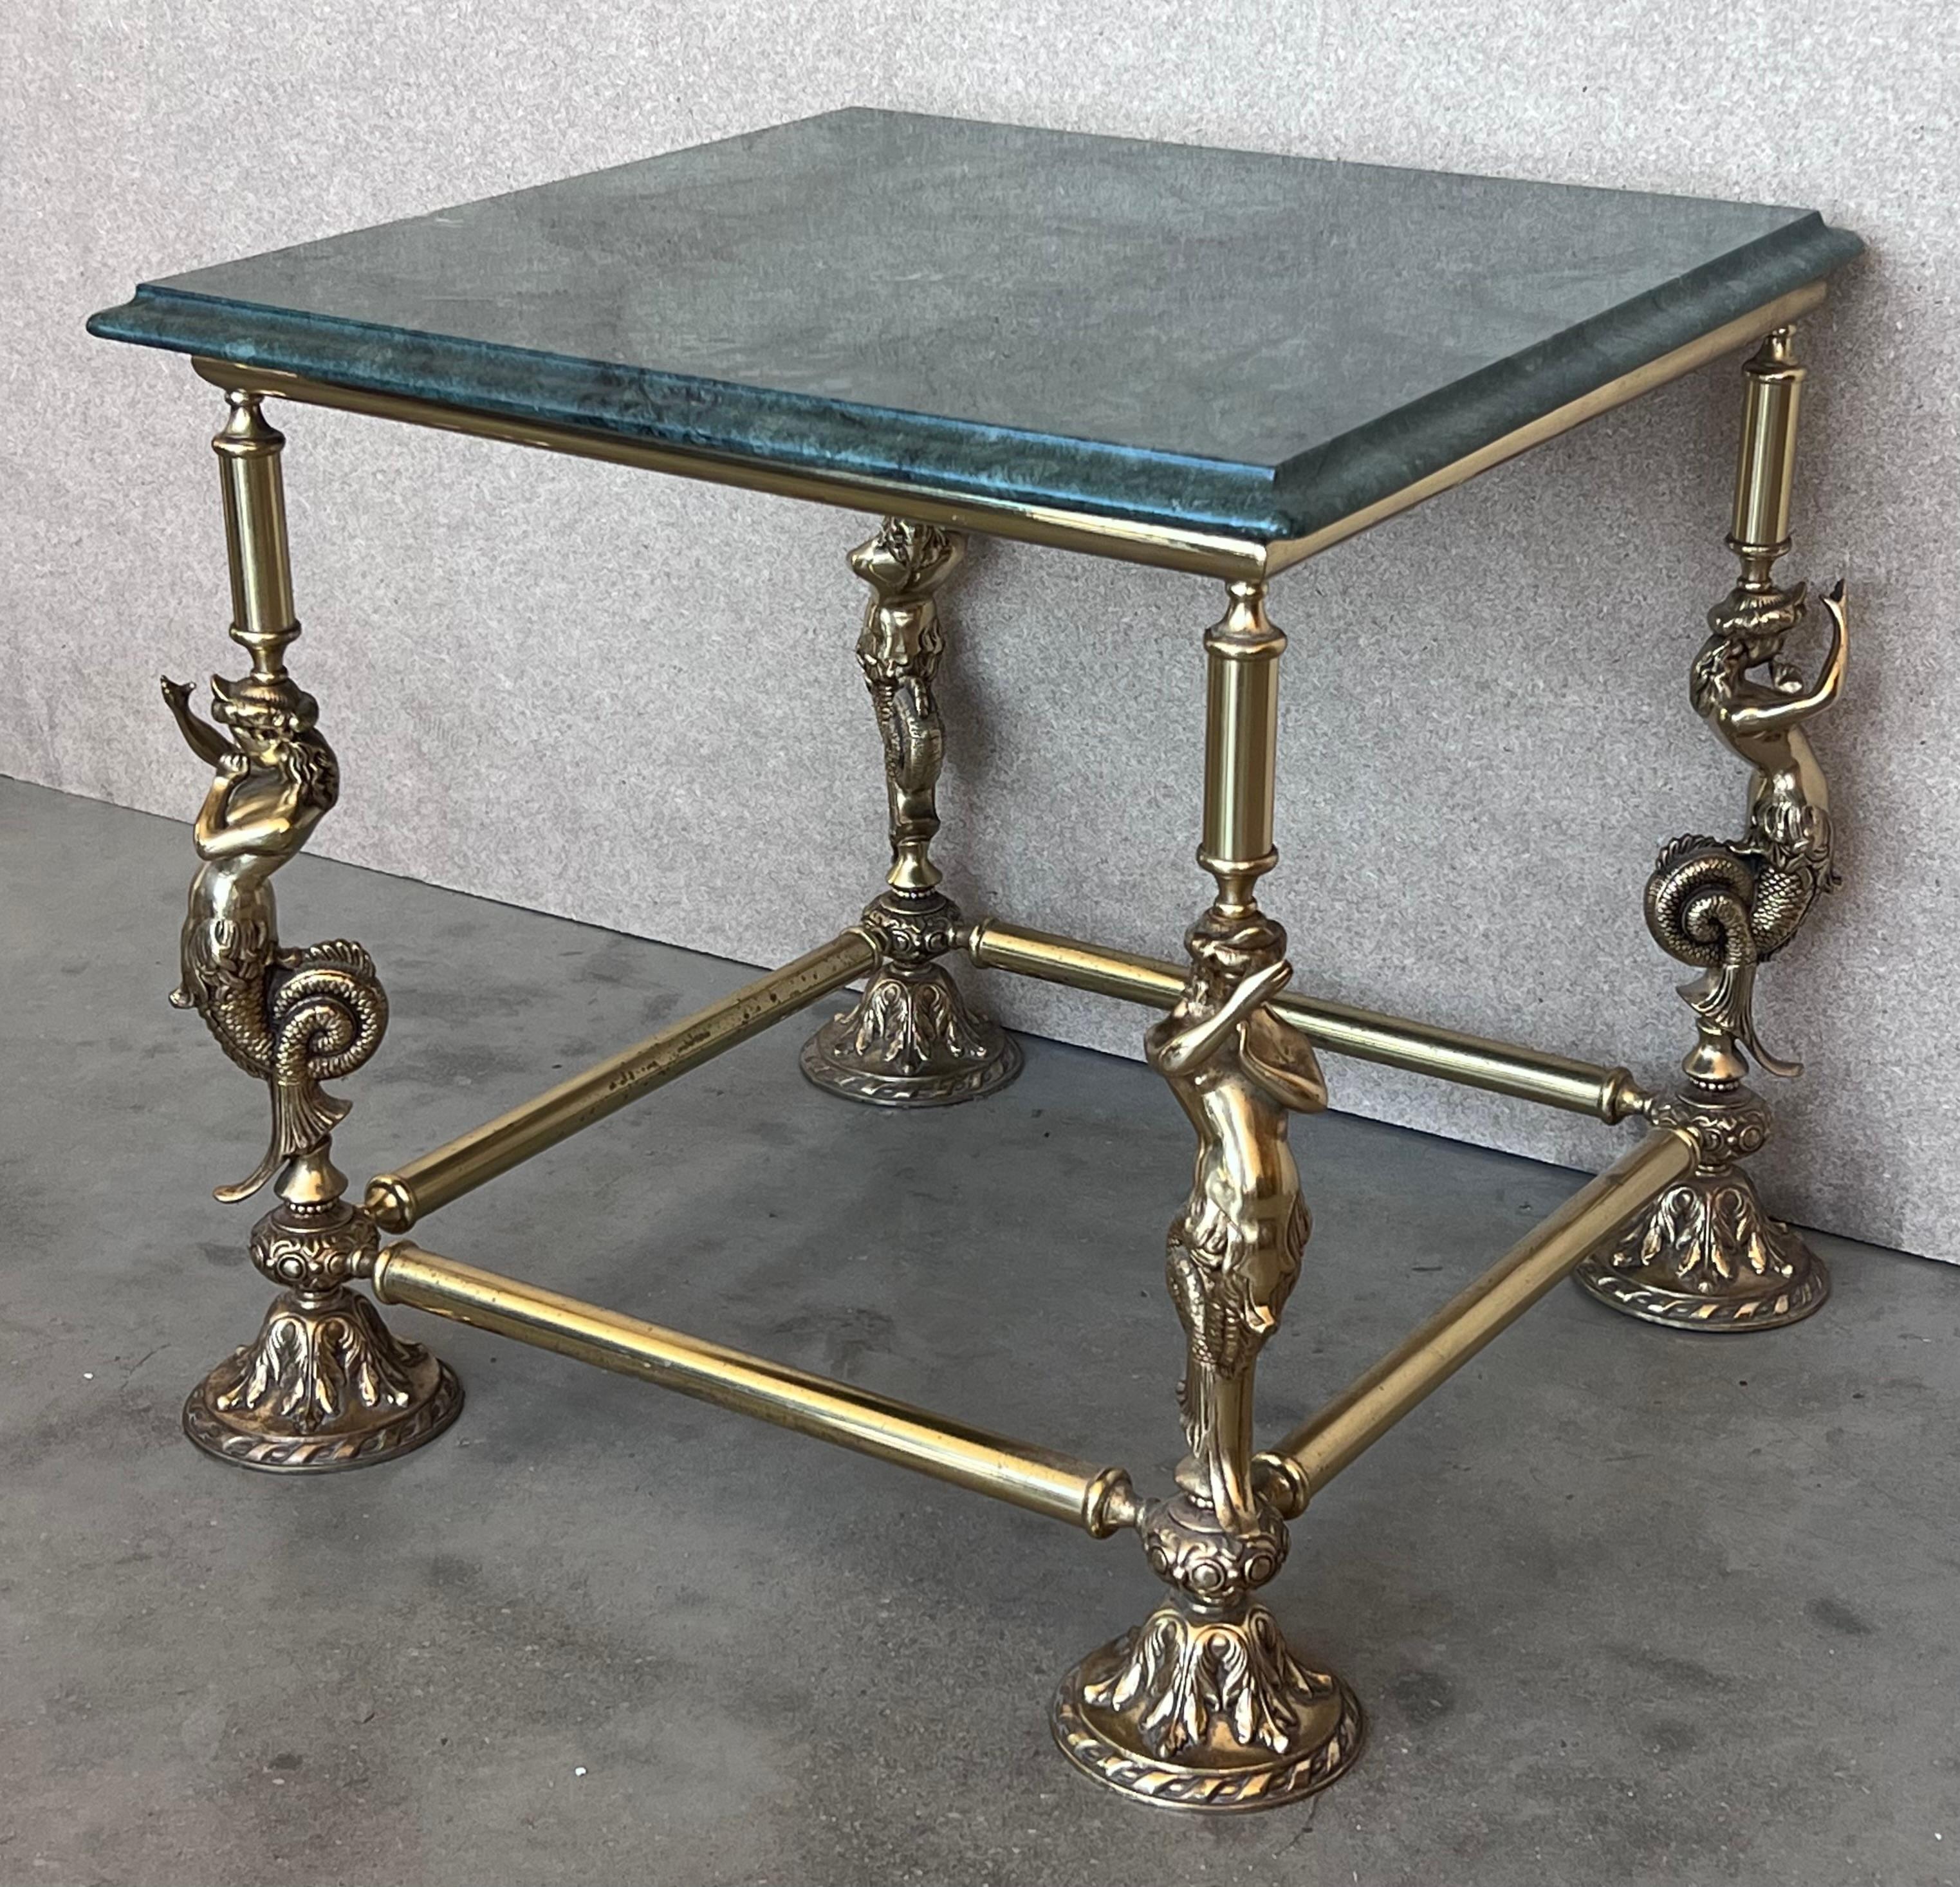 Spanish Italian Bronze Square Side Table with Green Marble Top, circa 1845 For Sale